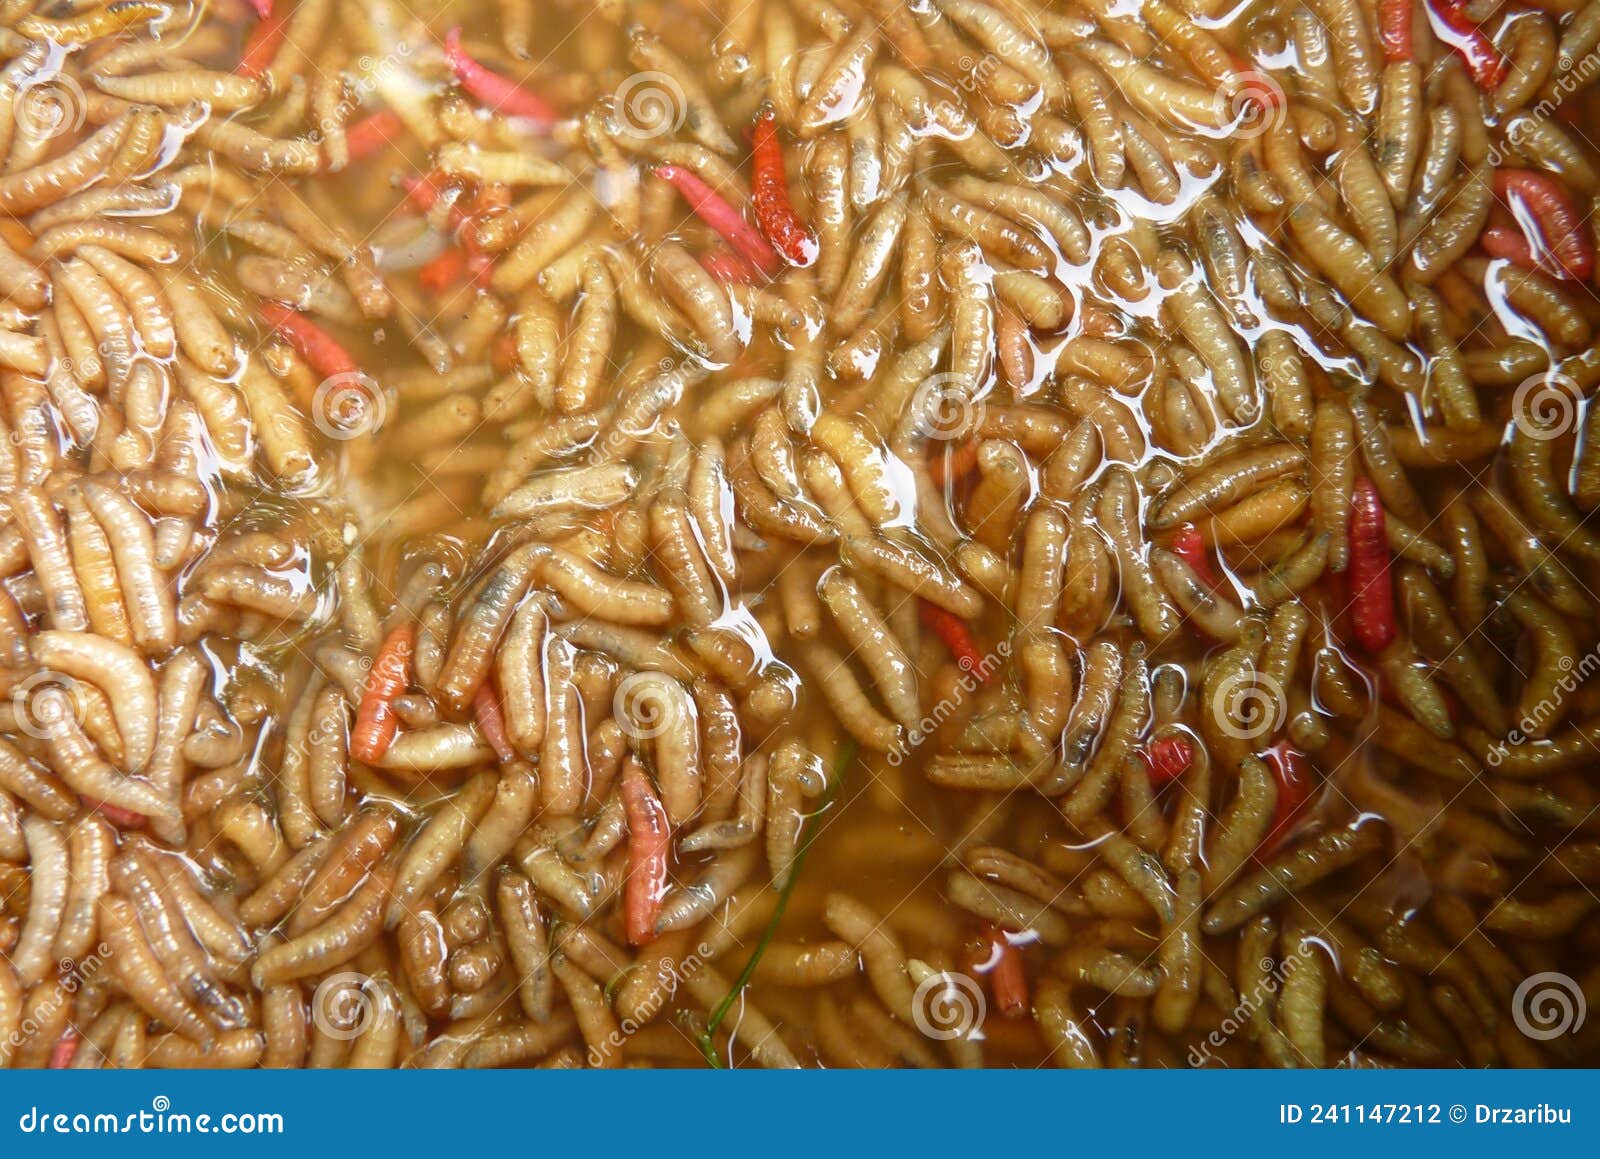 A Large Amount of Meat Worms Drowned in Water that are Used As Bait for  Fishing or Food for Birds and Poultry Stock Photo - Image of water, worms:  241147212